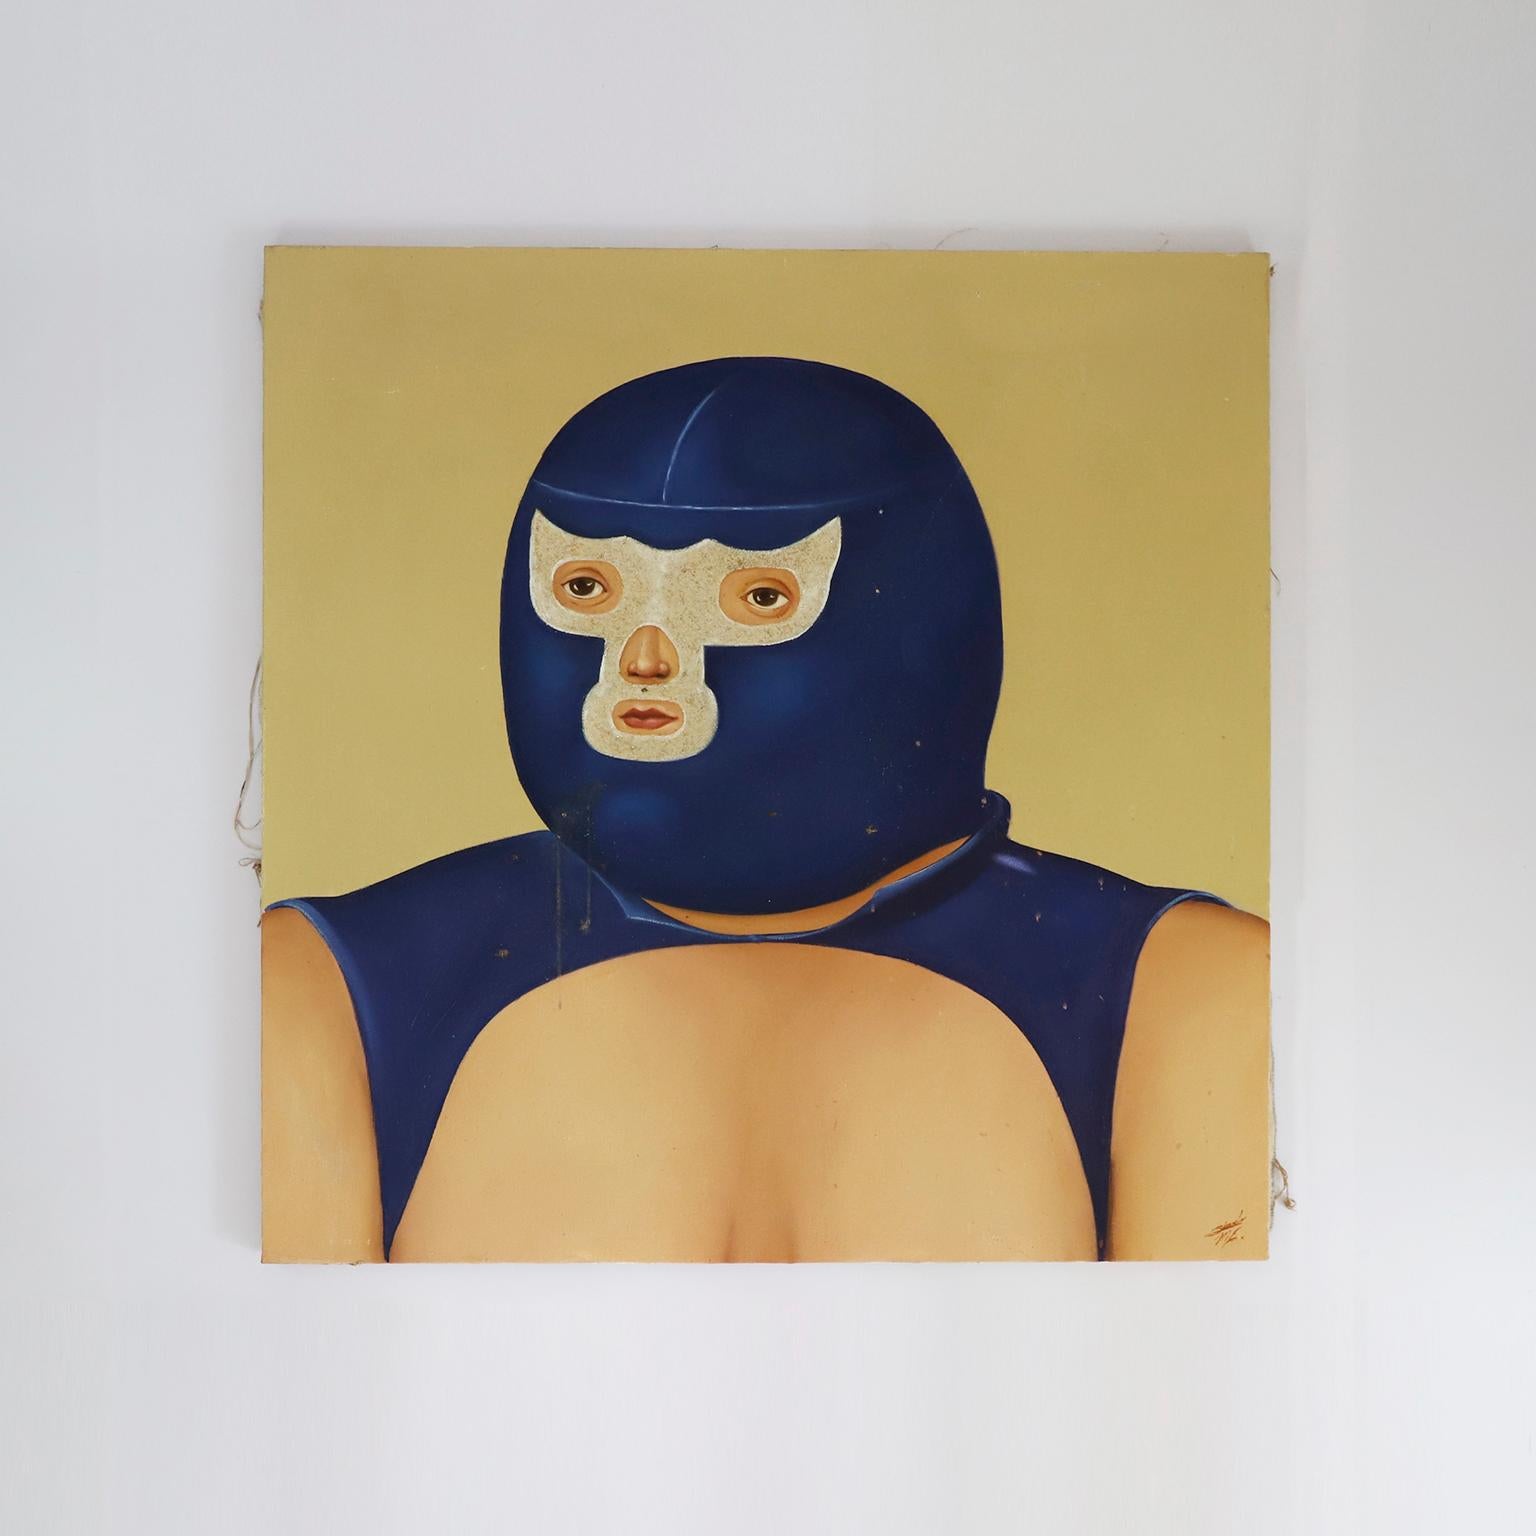 Circa 1970, we offer this pair of rare Mexican wrestling paintings.